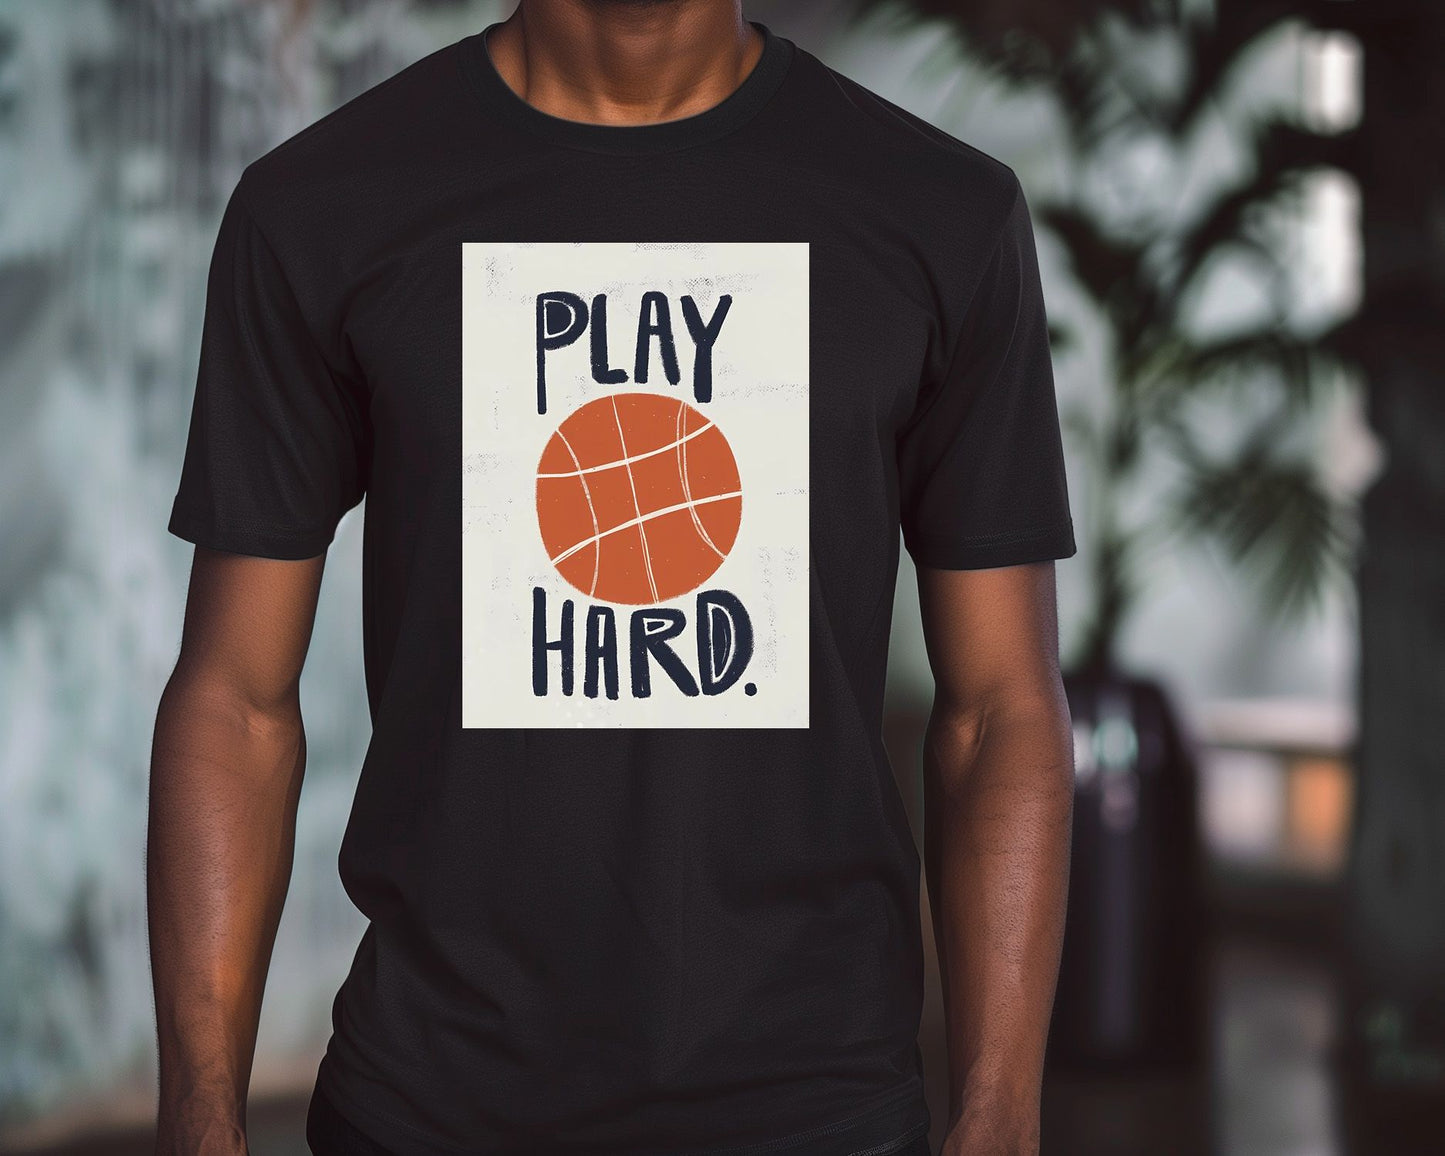 Play Hard - @UPGallery